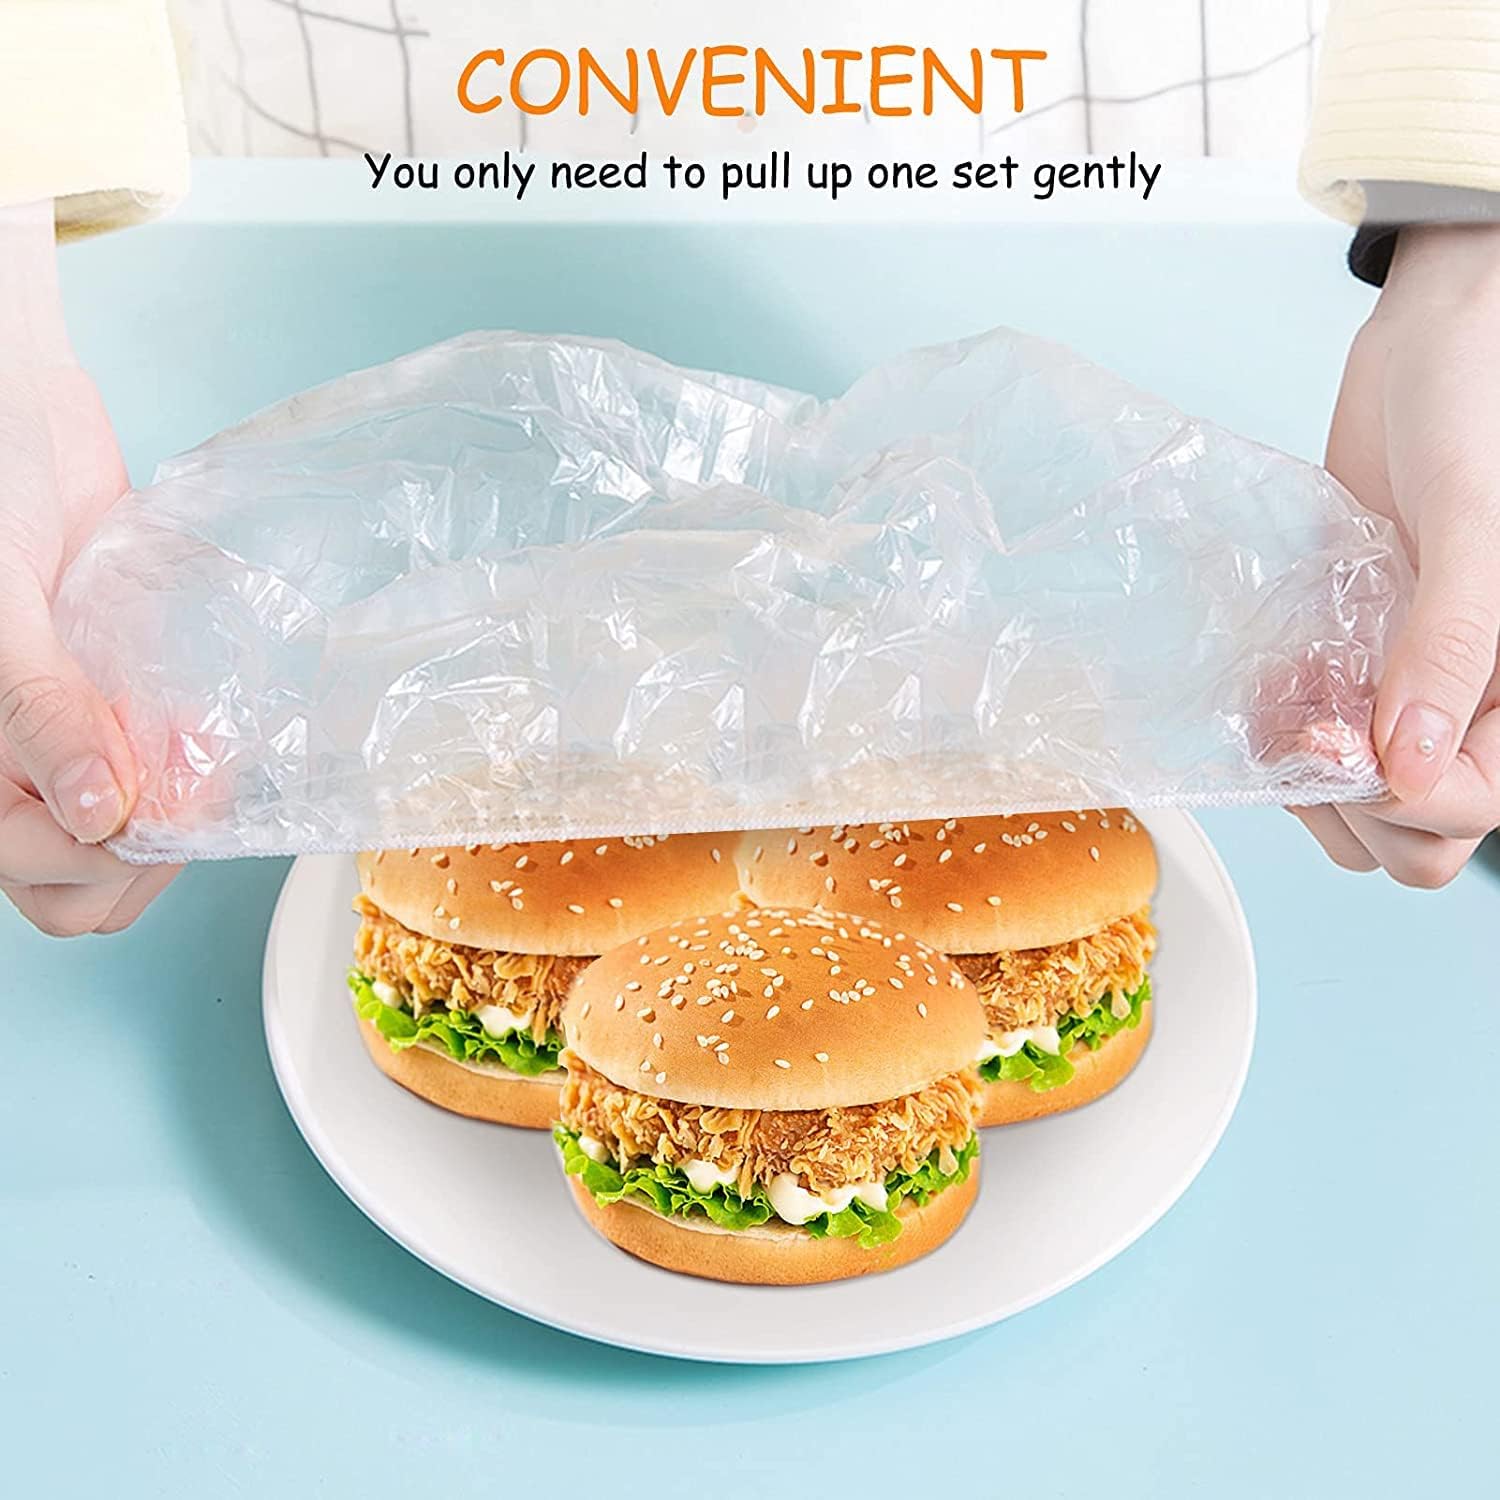 Disposable Food Wrapping Cover | Cling Wrapping Film Zaappy.com